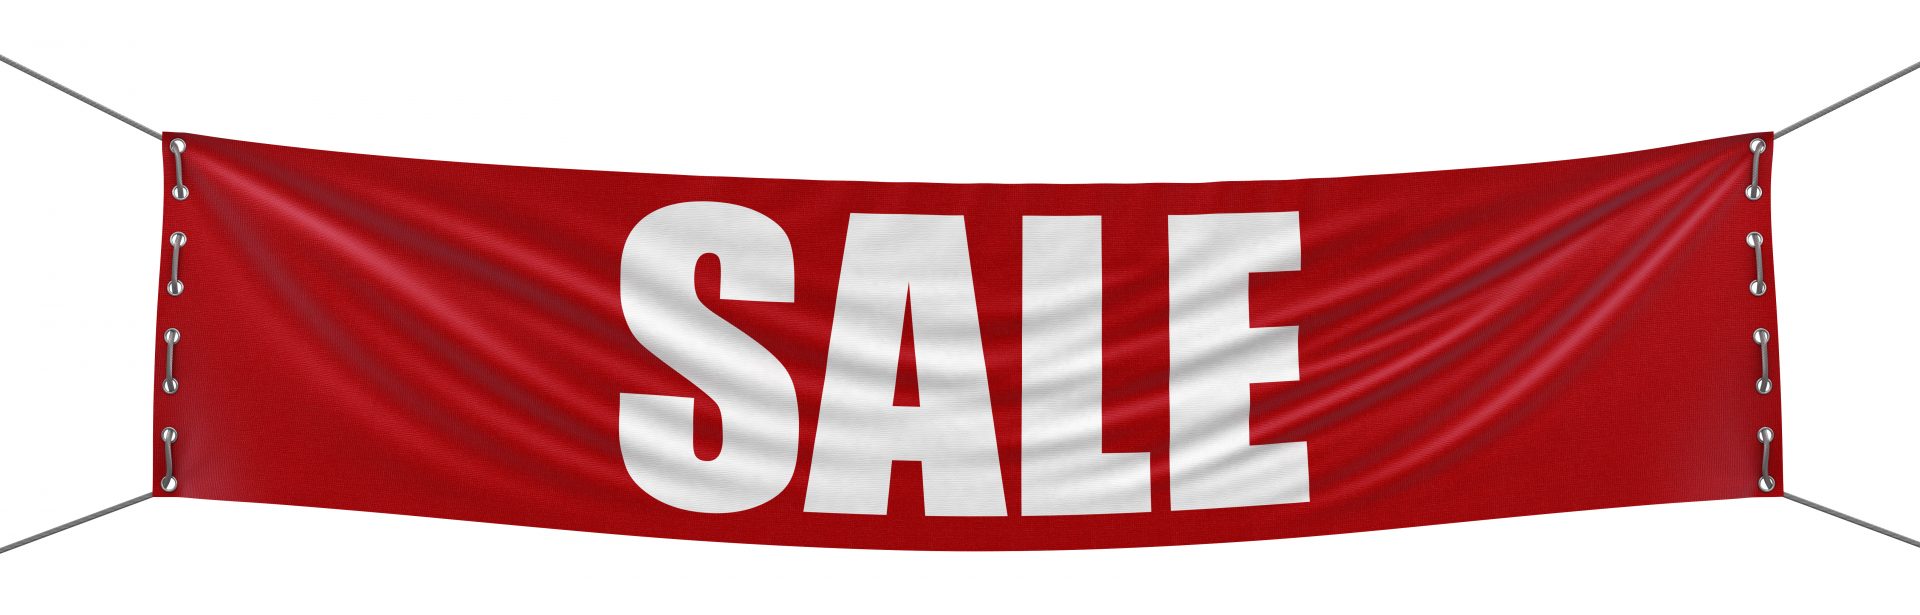 Sale Banner (clipping path included)